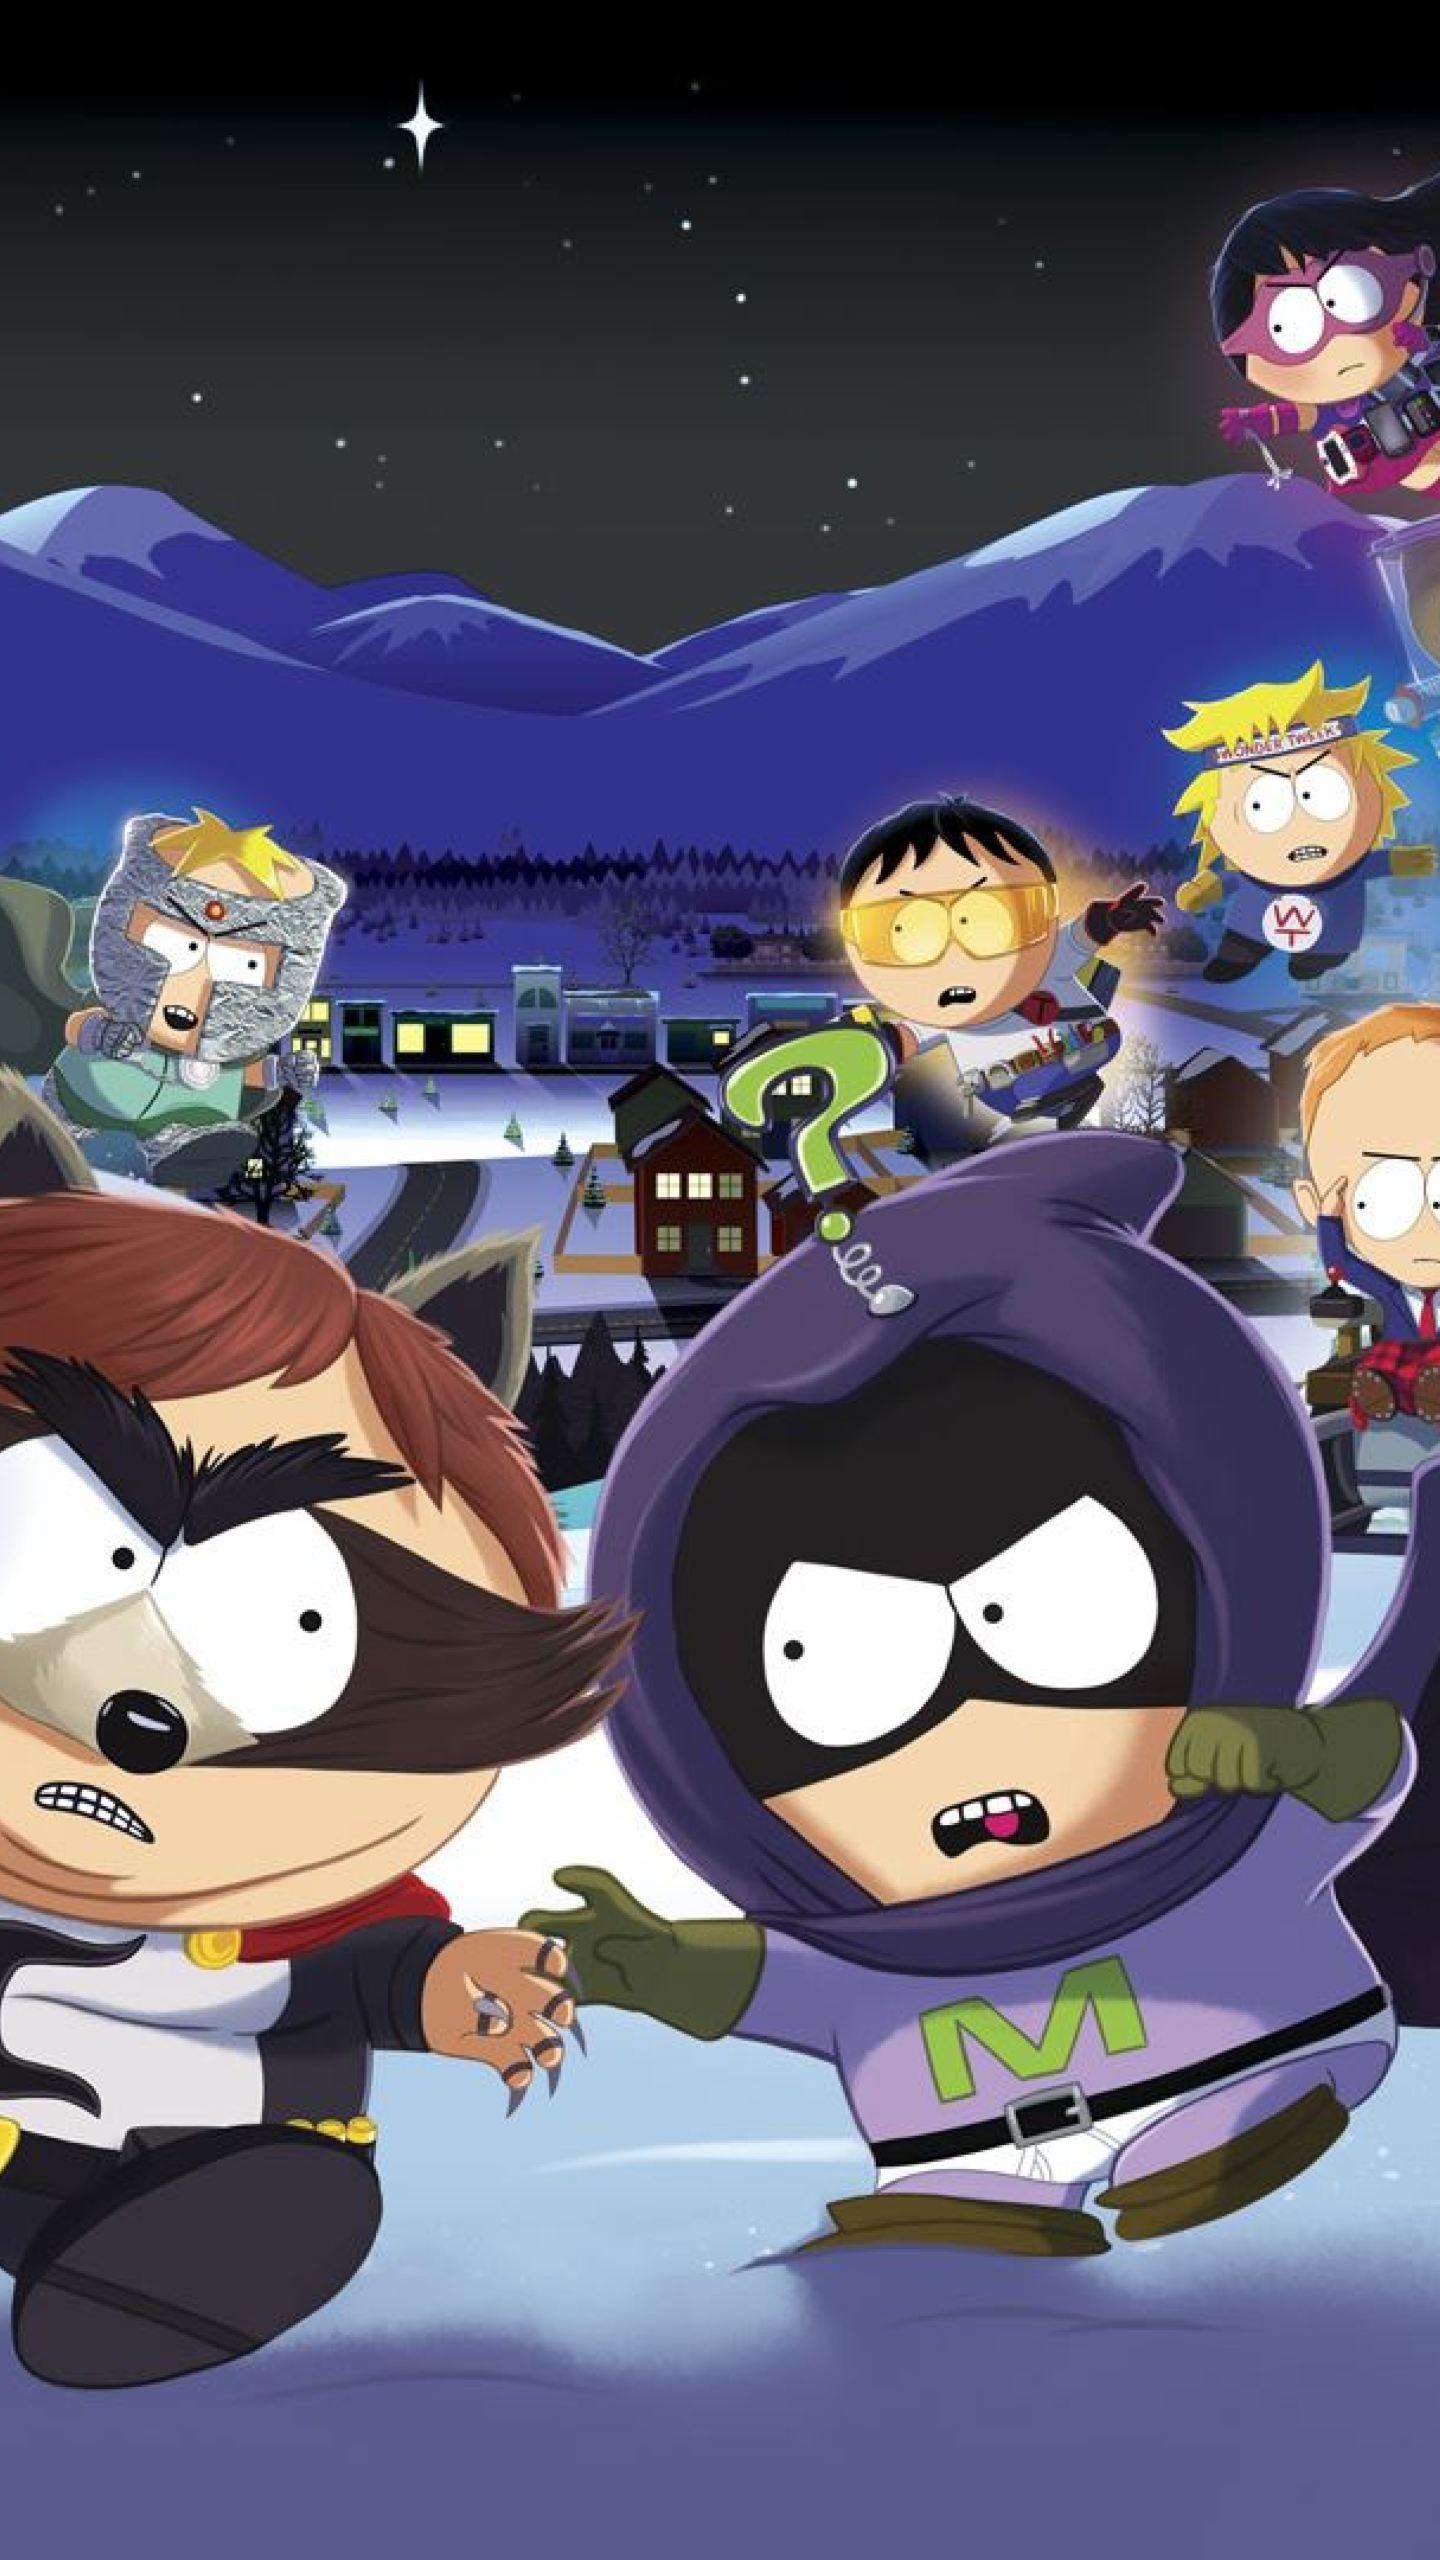 Download South Park, The Fractured But Whole, South Park Digital